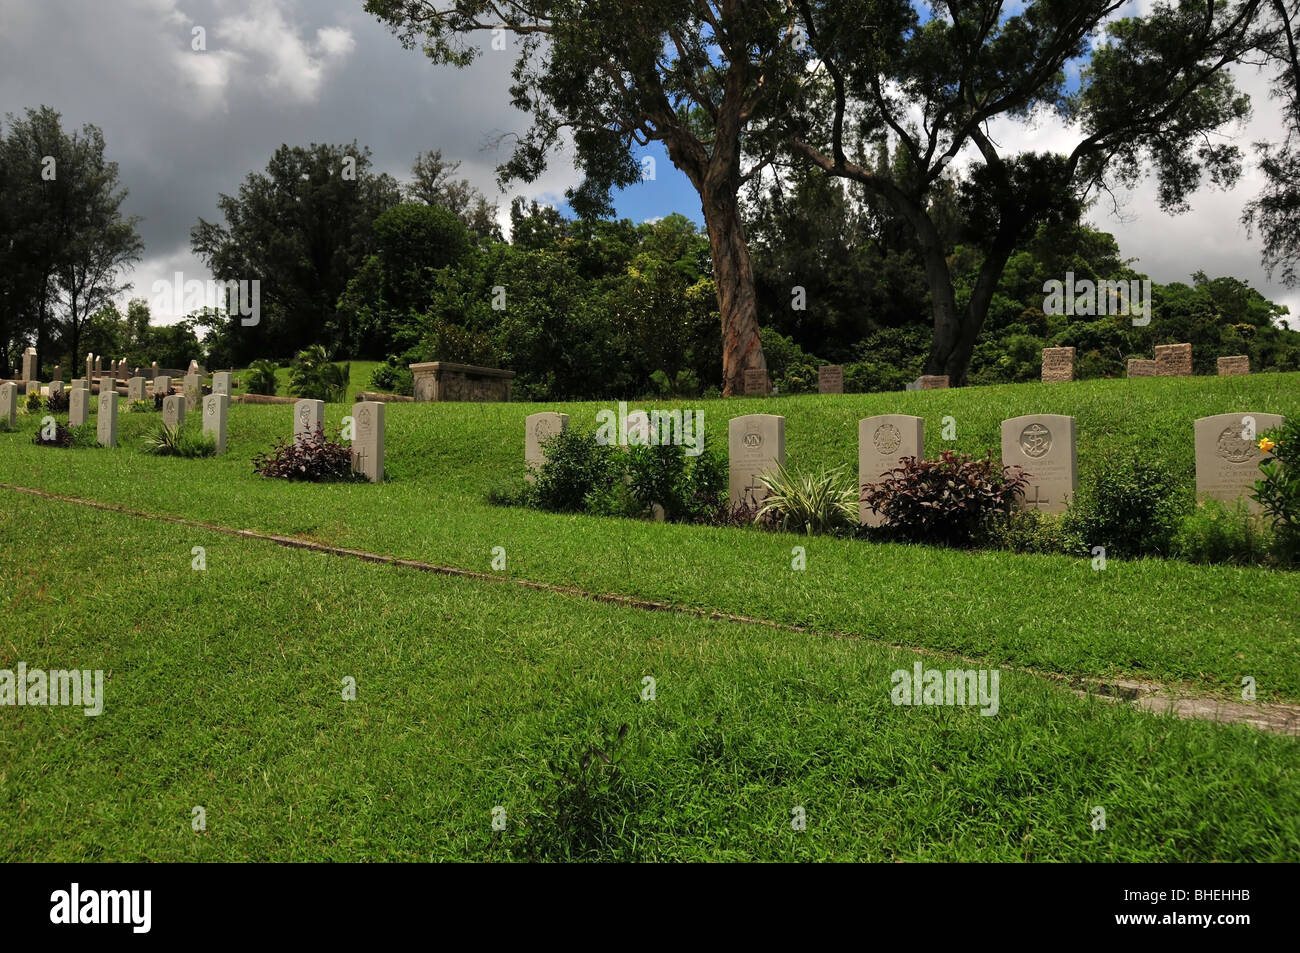 Grassy slope with a line of early 1940s military grave headstones, Stanley Military Cemetery, Stanley, Hong Kong, China Stock Photo